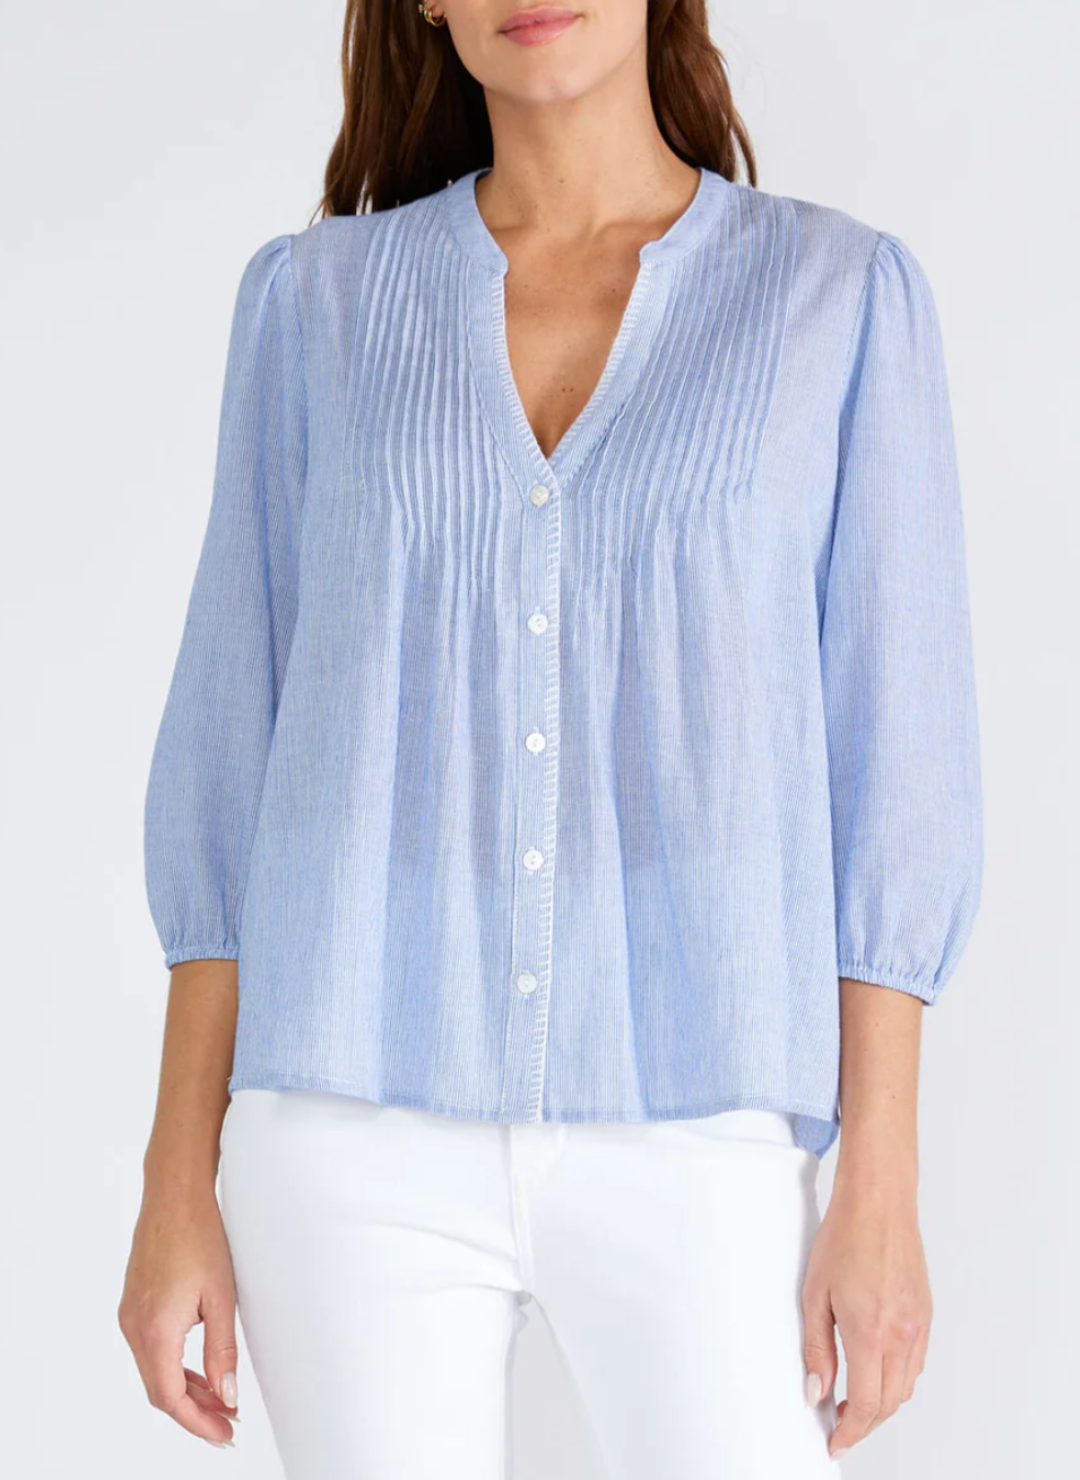 Model wearing LS Cloudy Skies Top with a split v-neckline, 3/4 length sleeve, and elastic cuff. Features a button front with a crochet stitch border and pintuck details styled with white jeans.